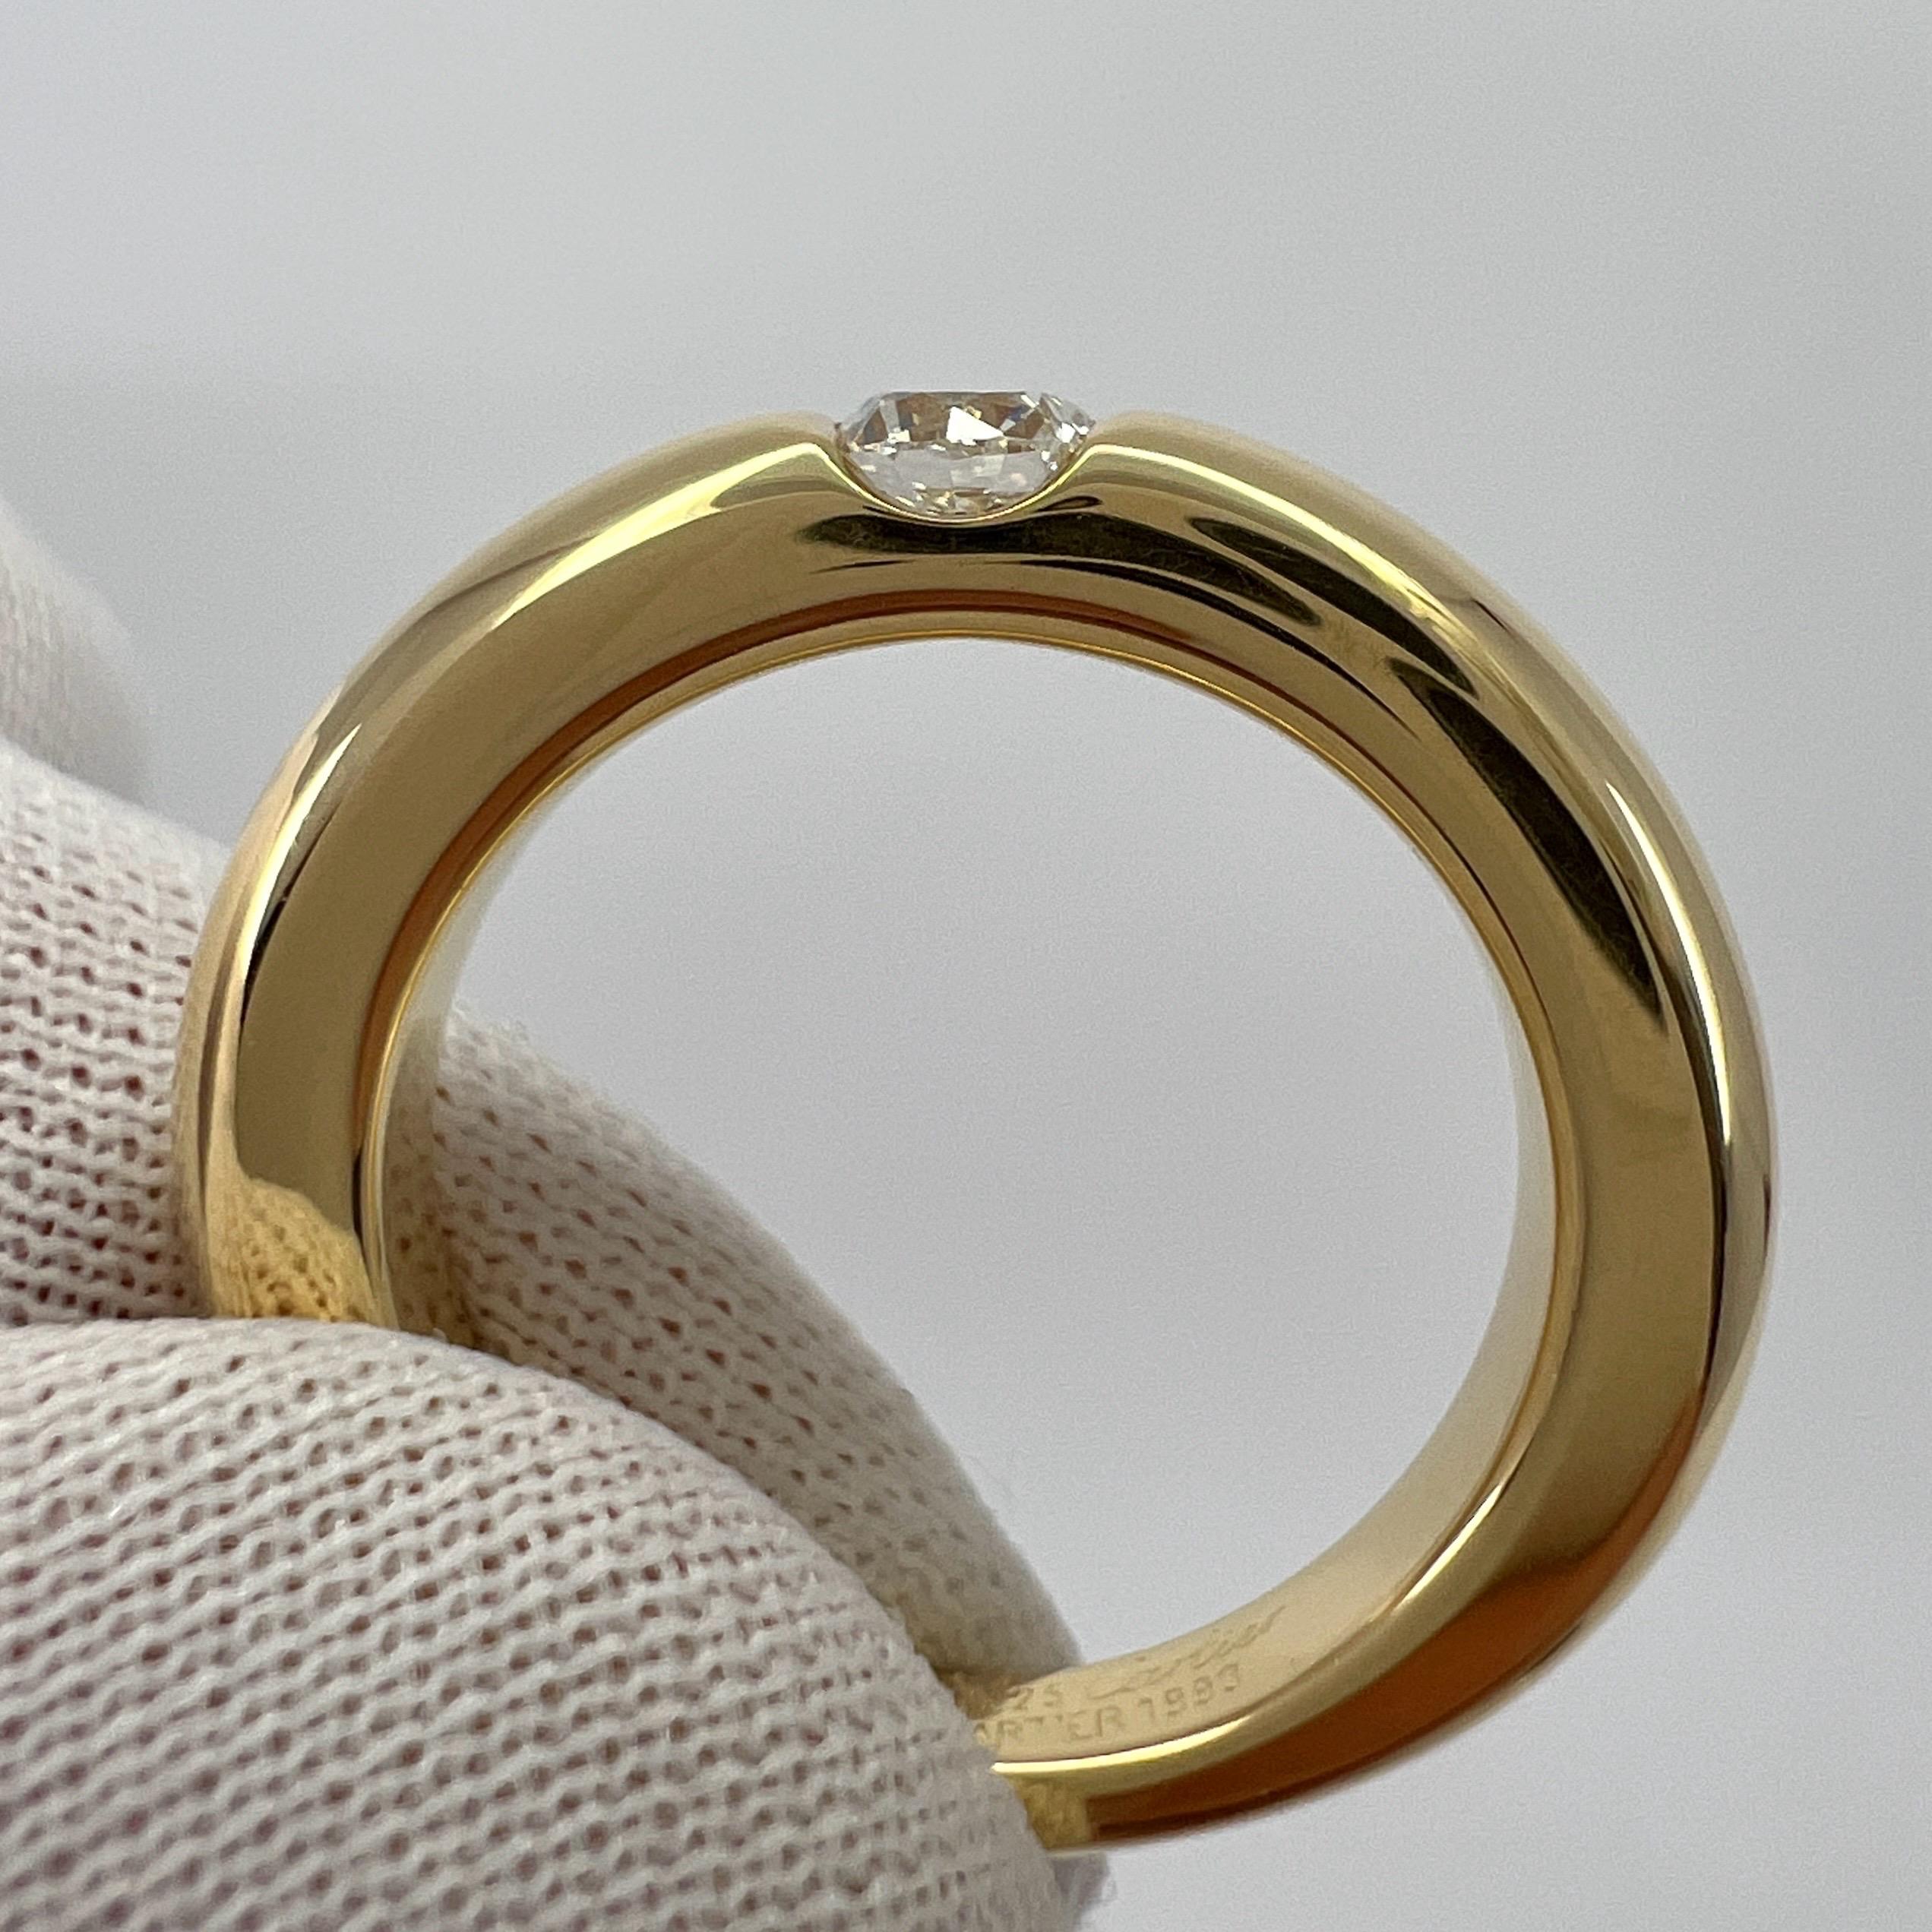 Vintage Cartier Round Diamond Ellipse 18k Yellow Gold Solitaire Band Ring US5 49 1